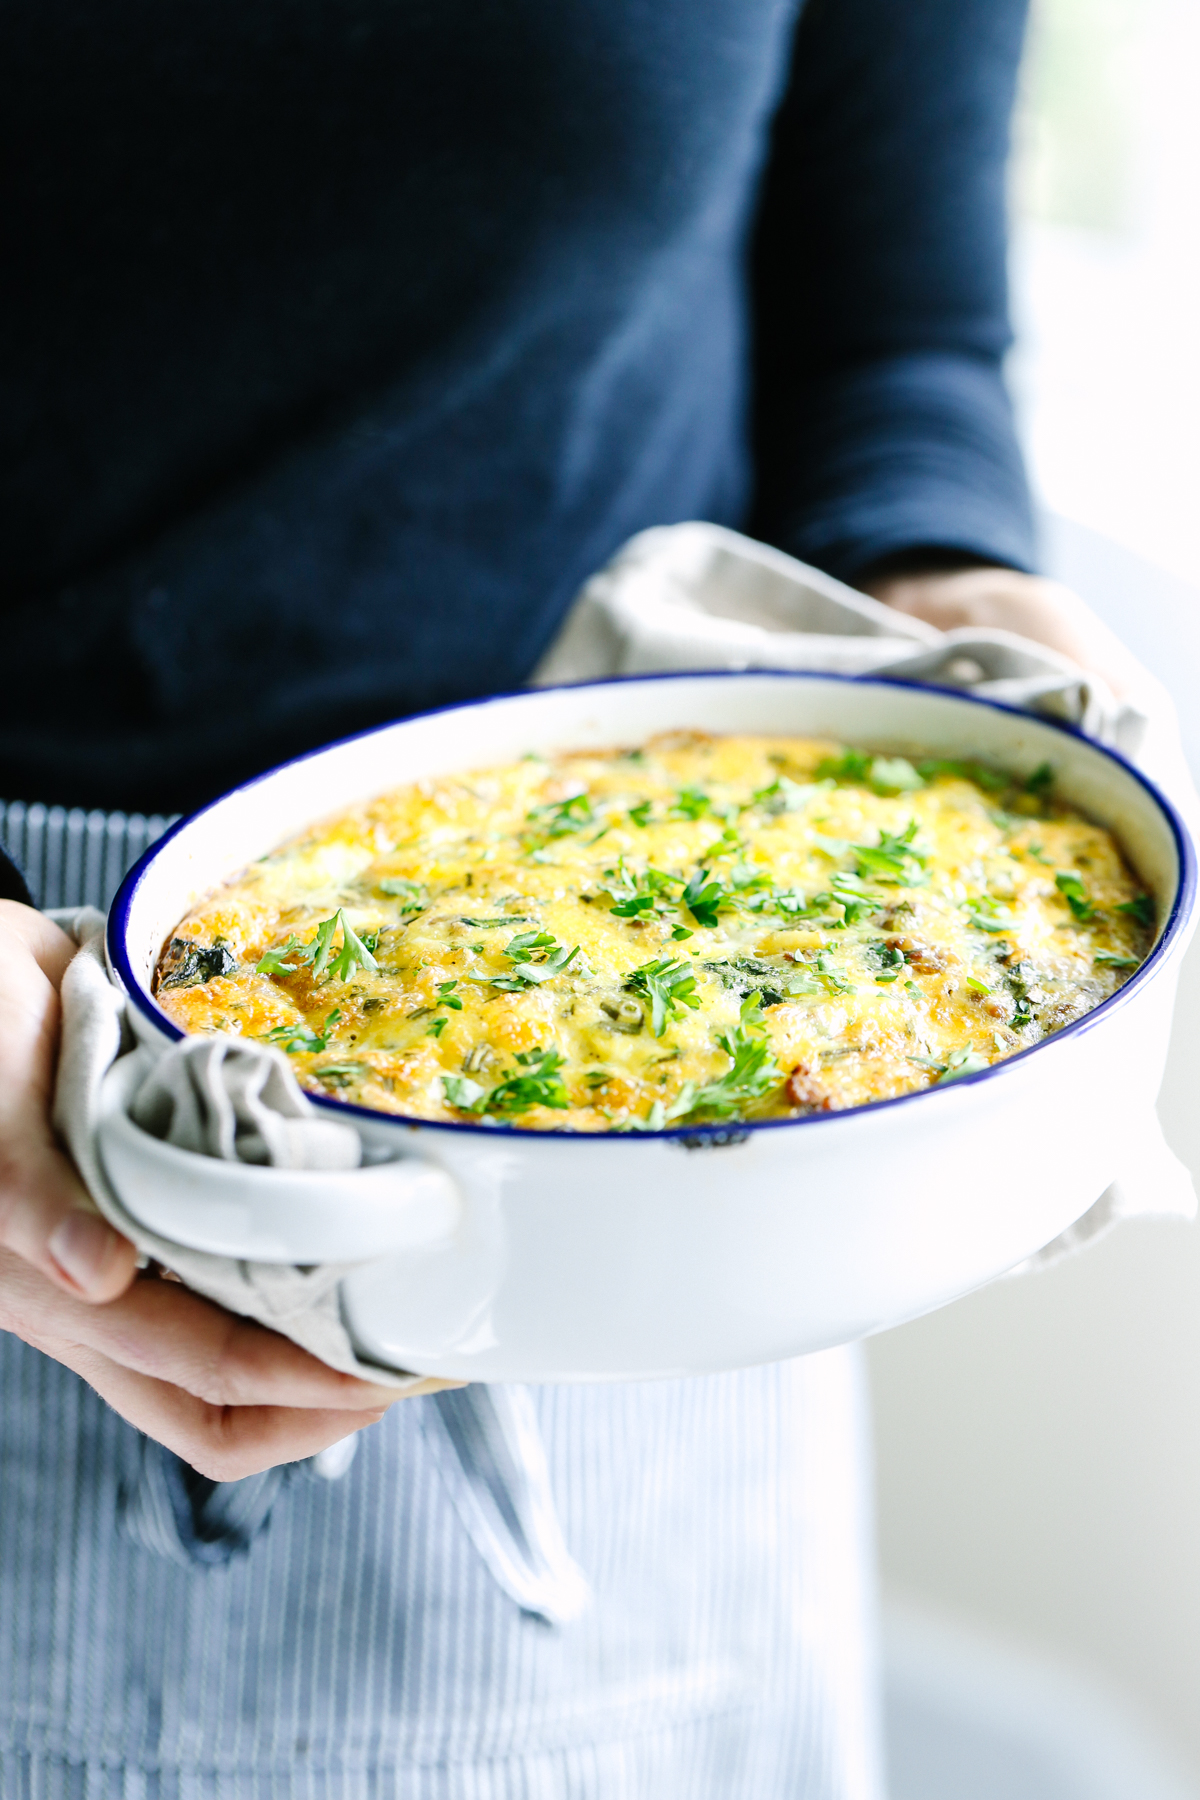 Hands holding a casserole dish with baked egg casserole inside.